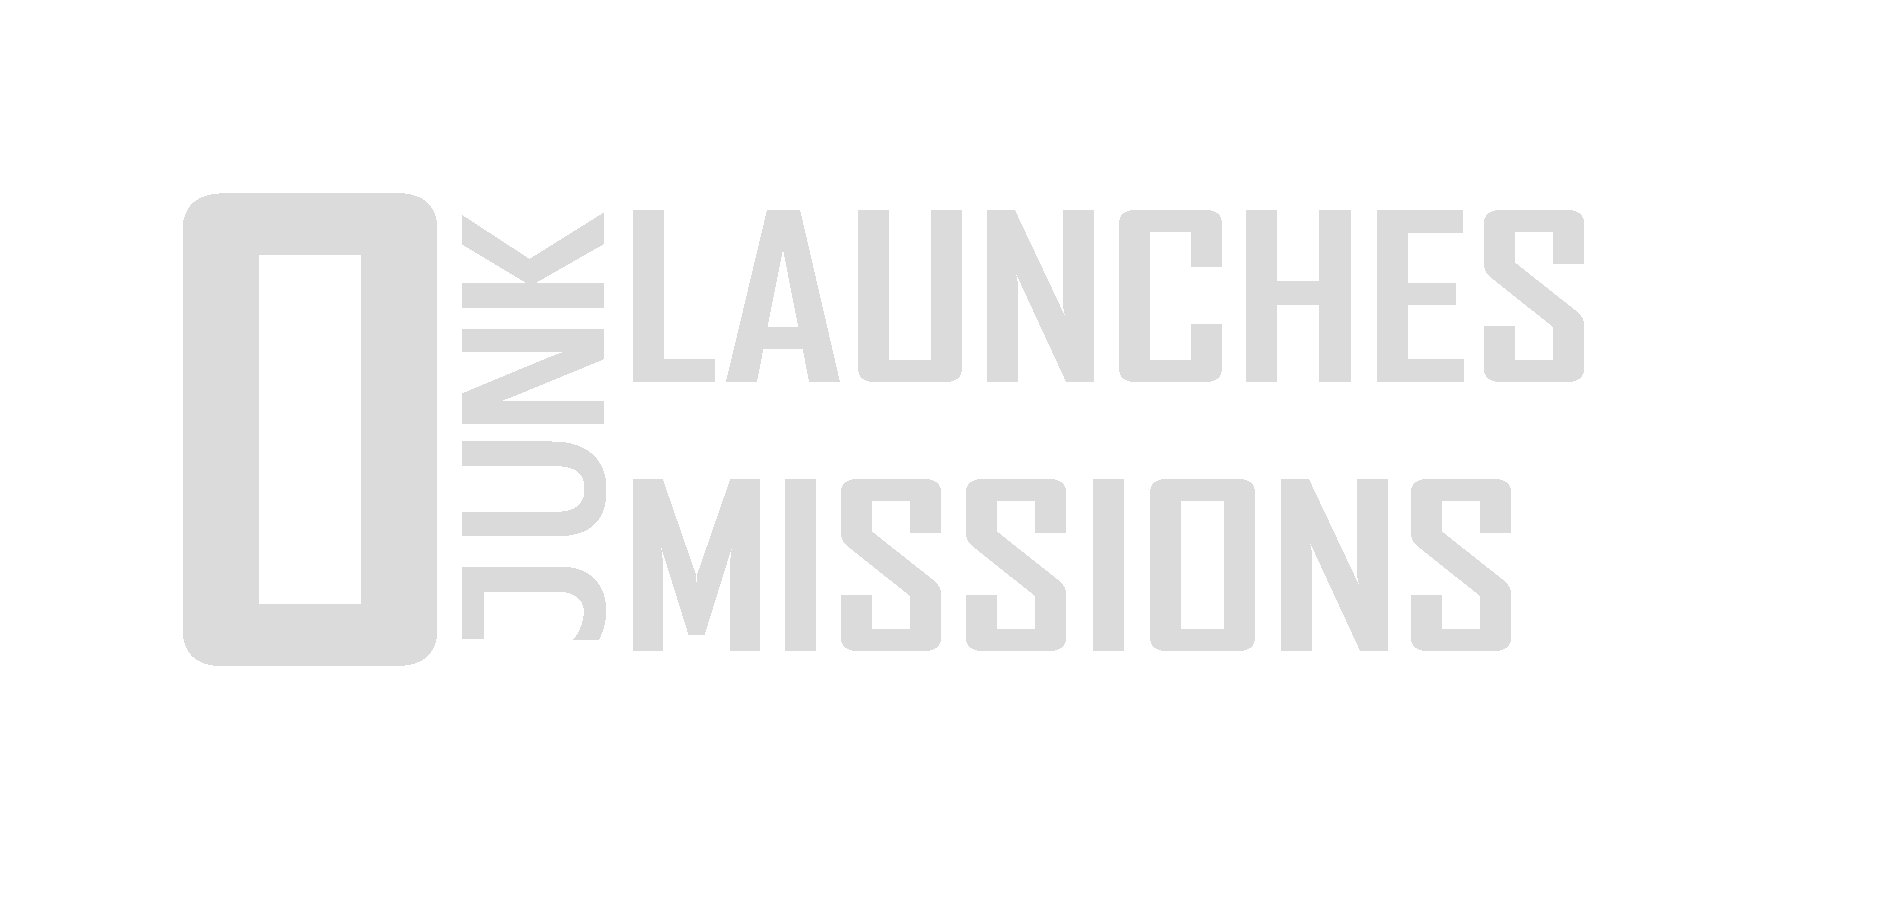 0 Junk launches and missions